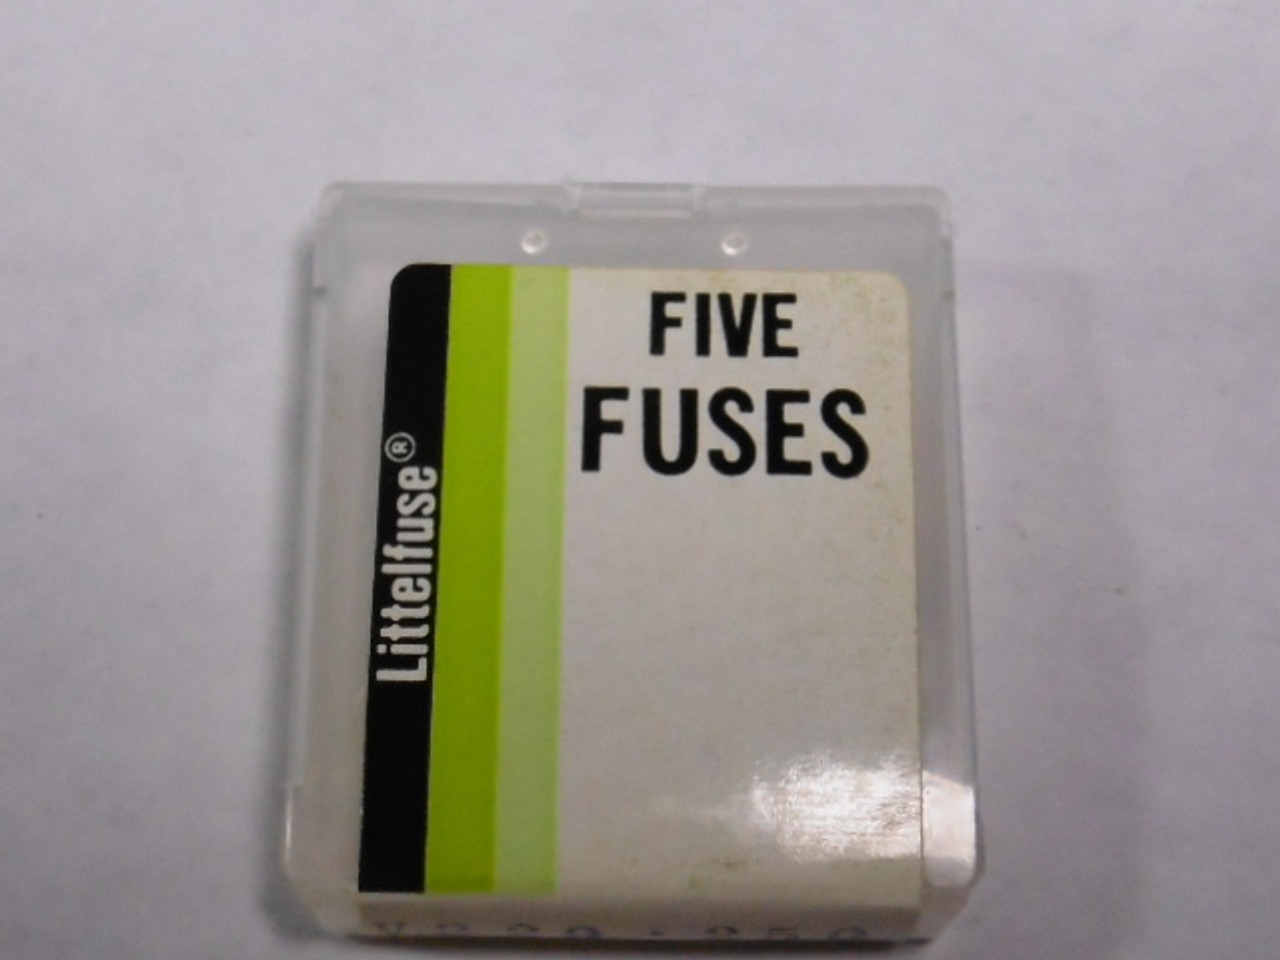 Littelfuse 229250 Miniature Fuse 0.25A 250V Lot of 5 ! NEW !